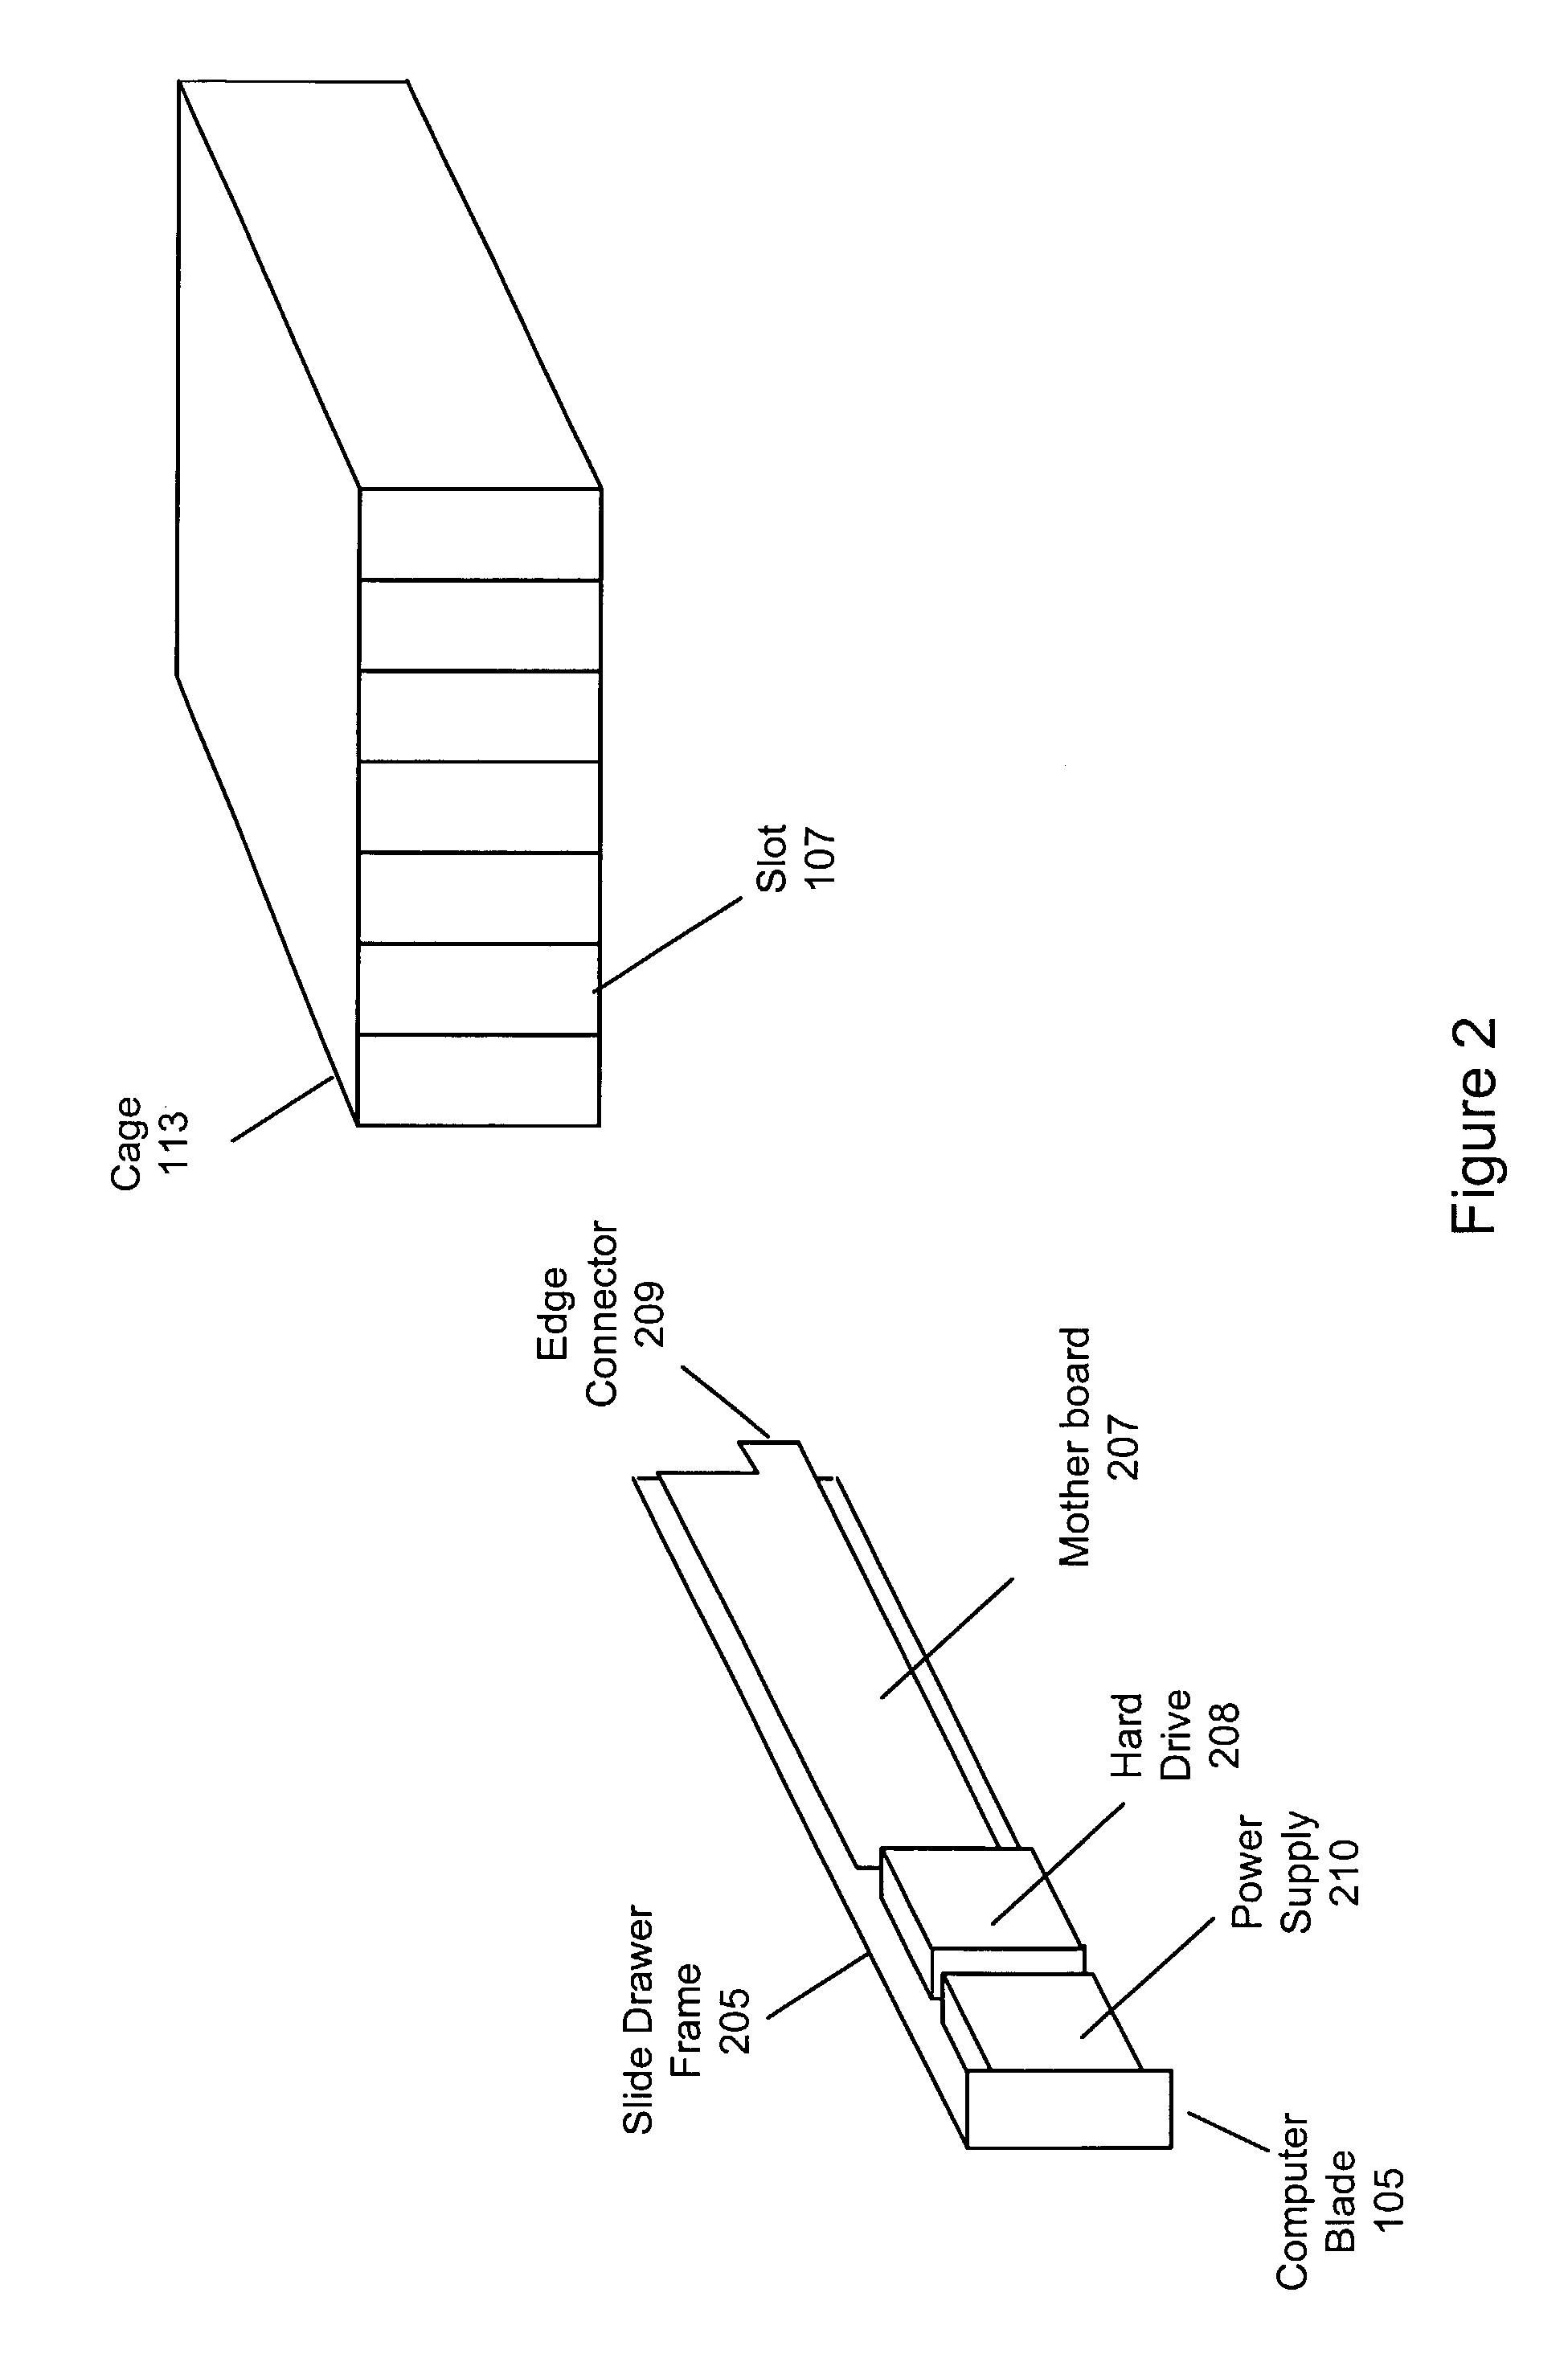 System and method for providing virtual network attached storage using excess distributed storage capacity